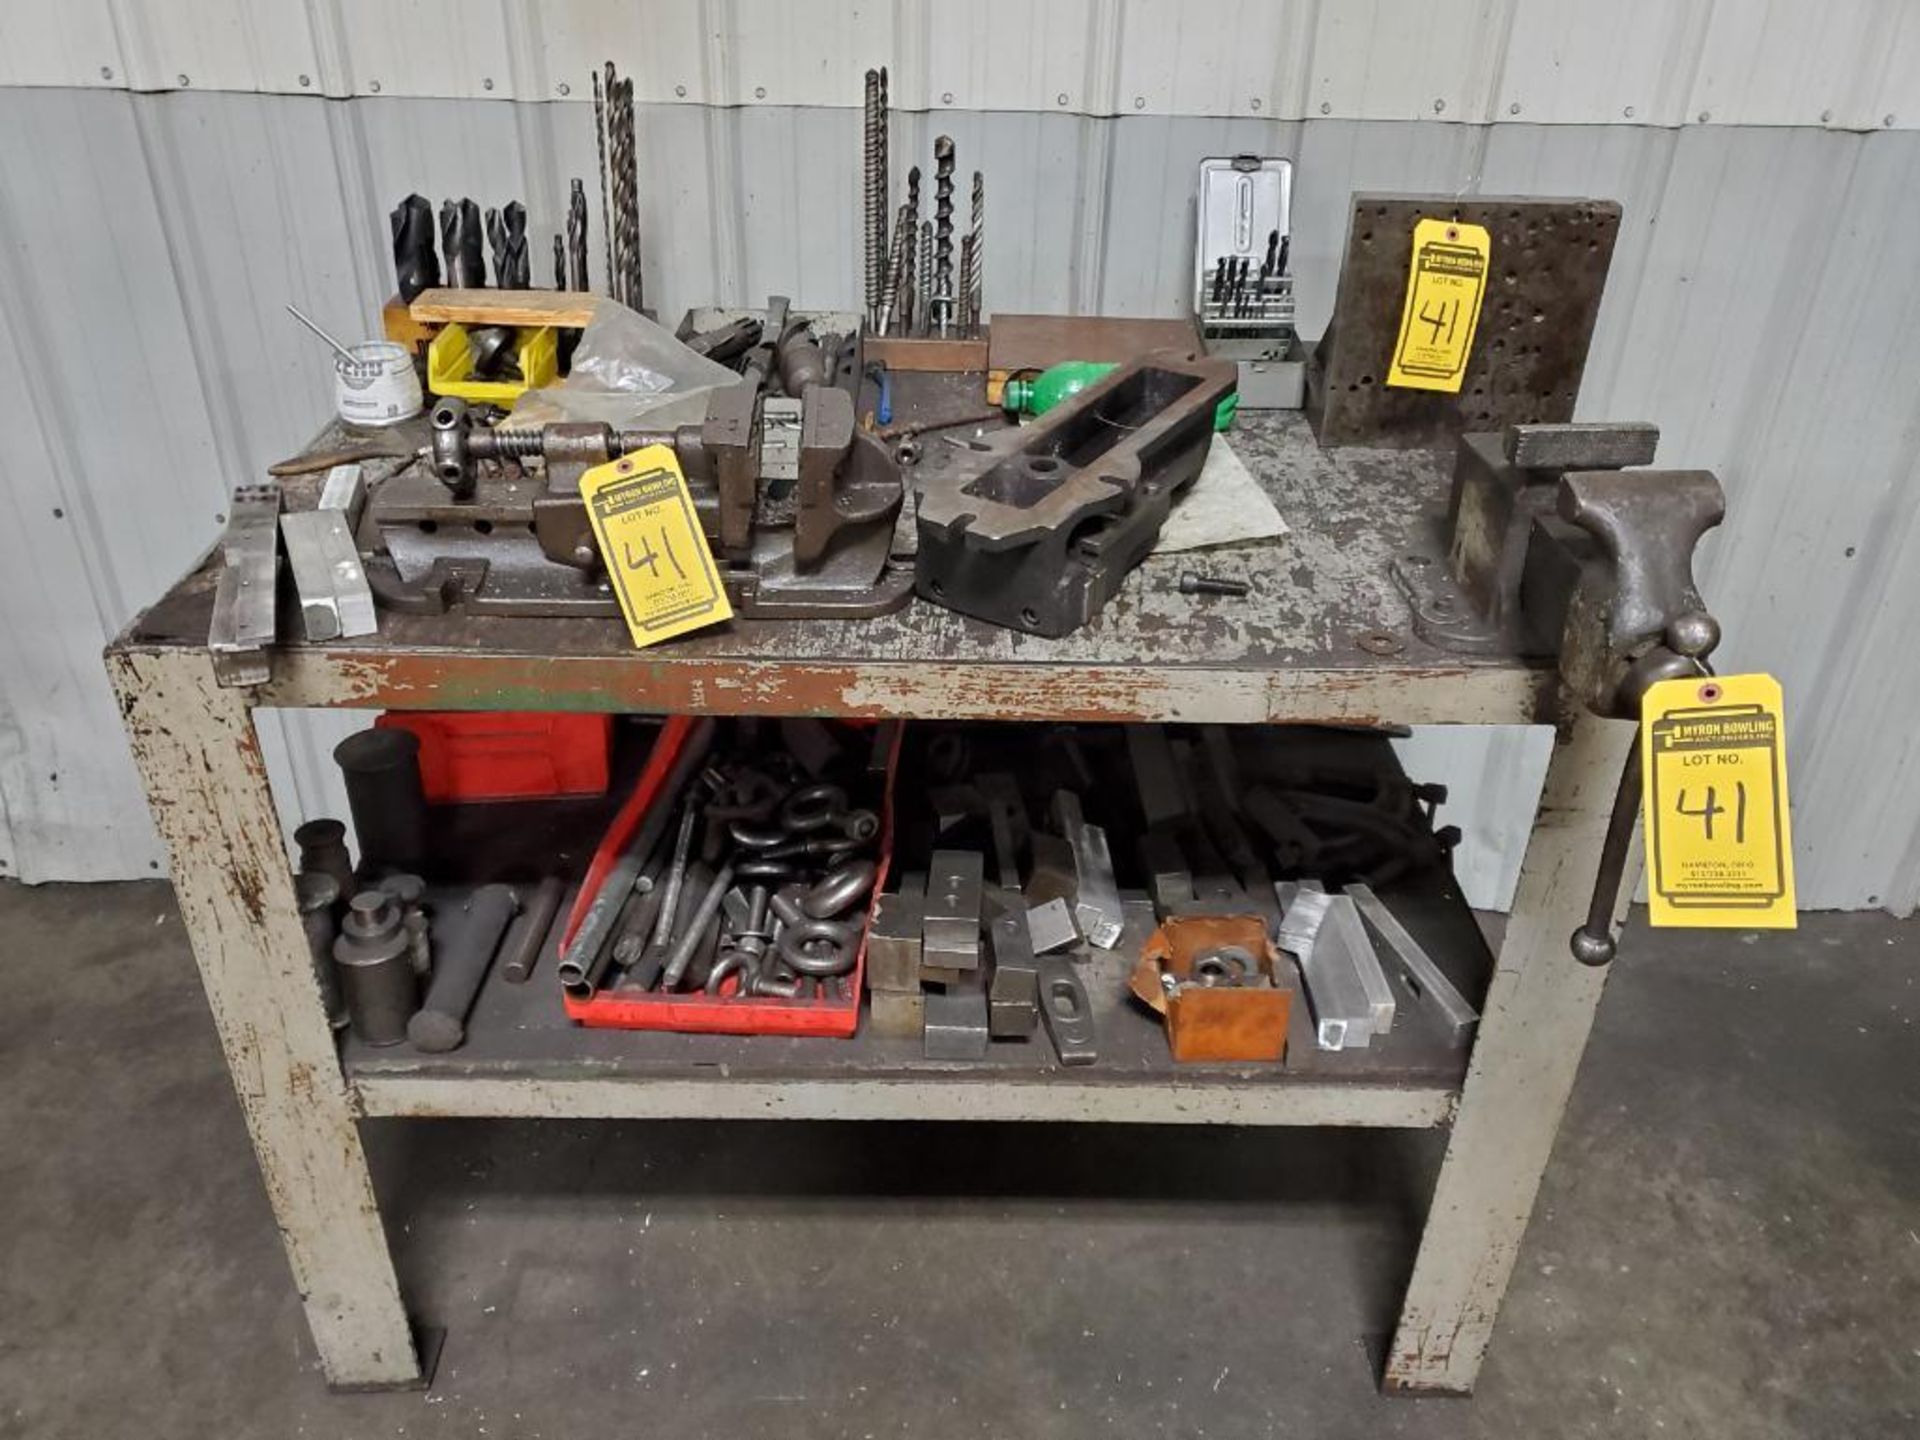 (2) STEEL TABLES, W/ BENCH VISE, ANGLE BLOCKS, EYE BOLTS, PARTS VISES, PERISHABLE TOOLING, & MORE